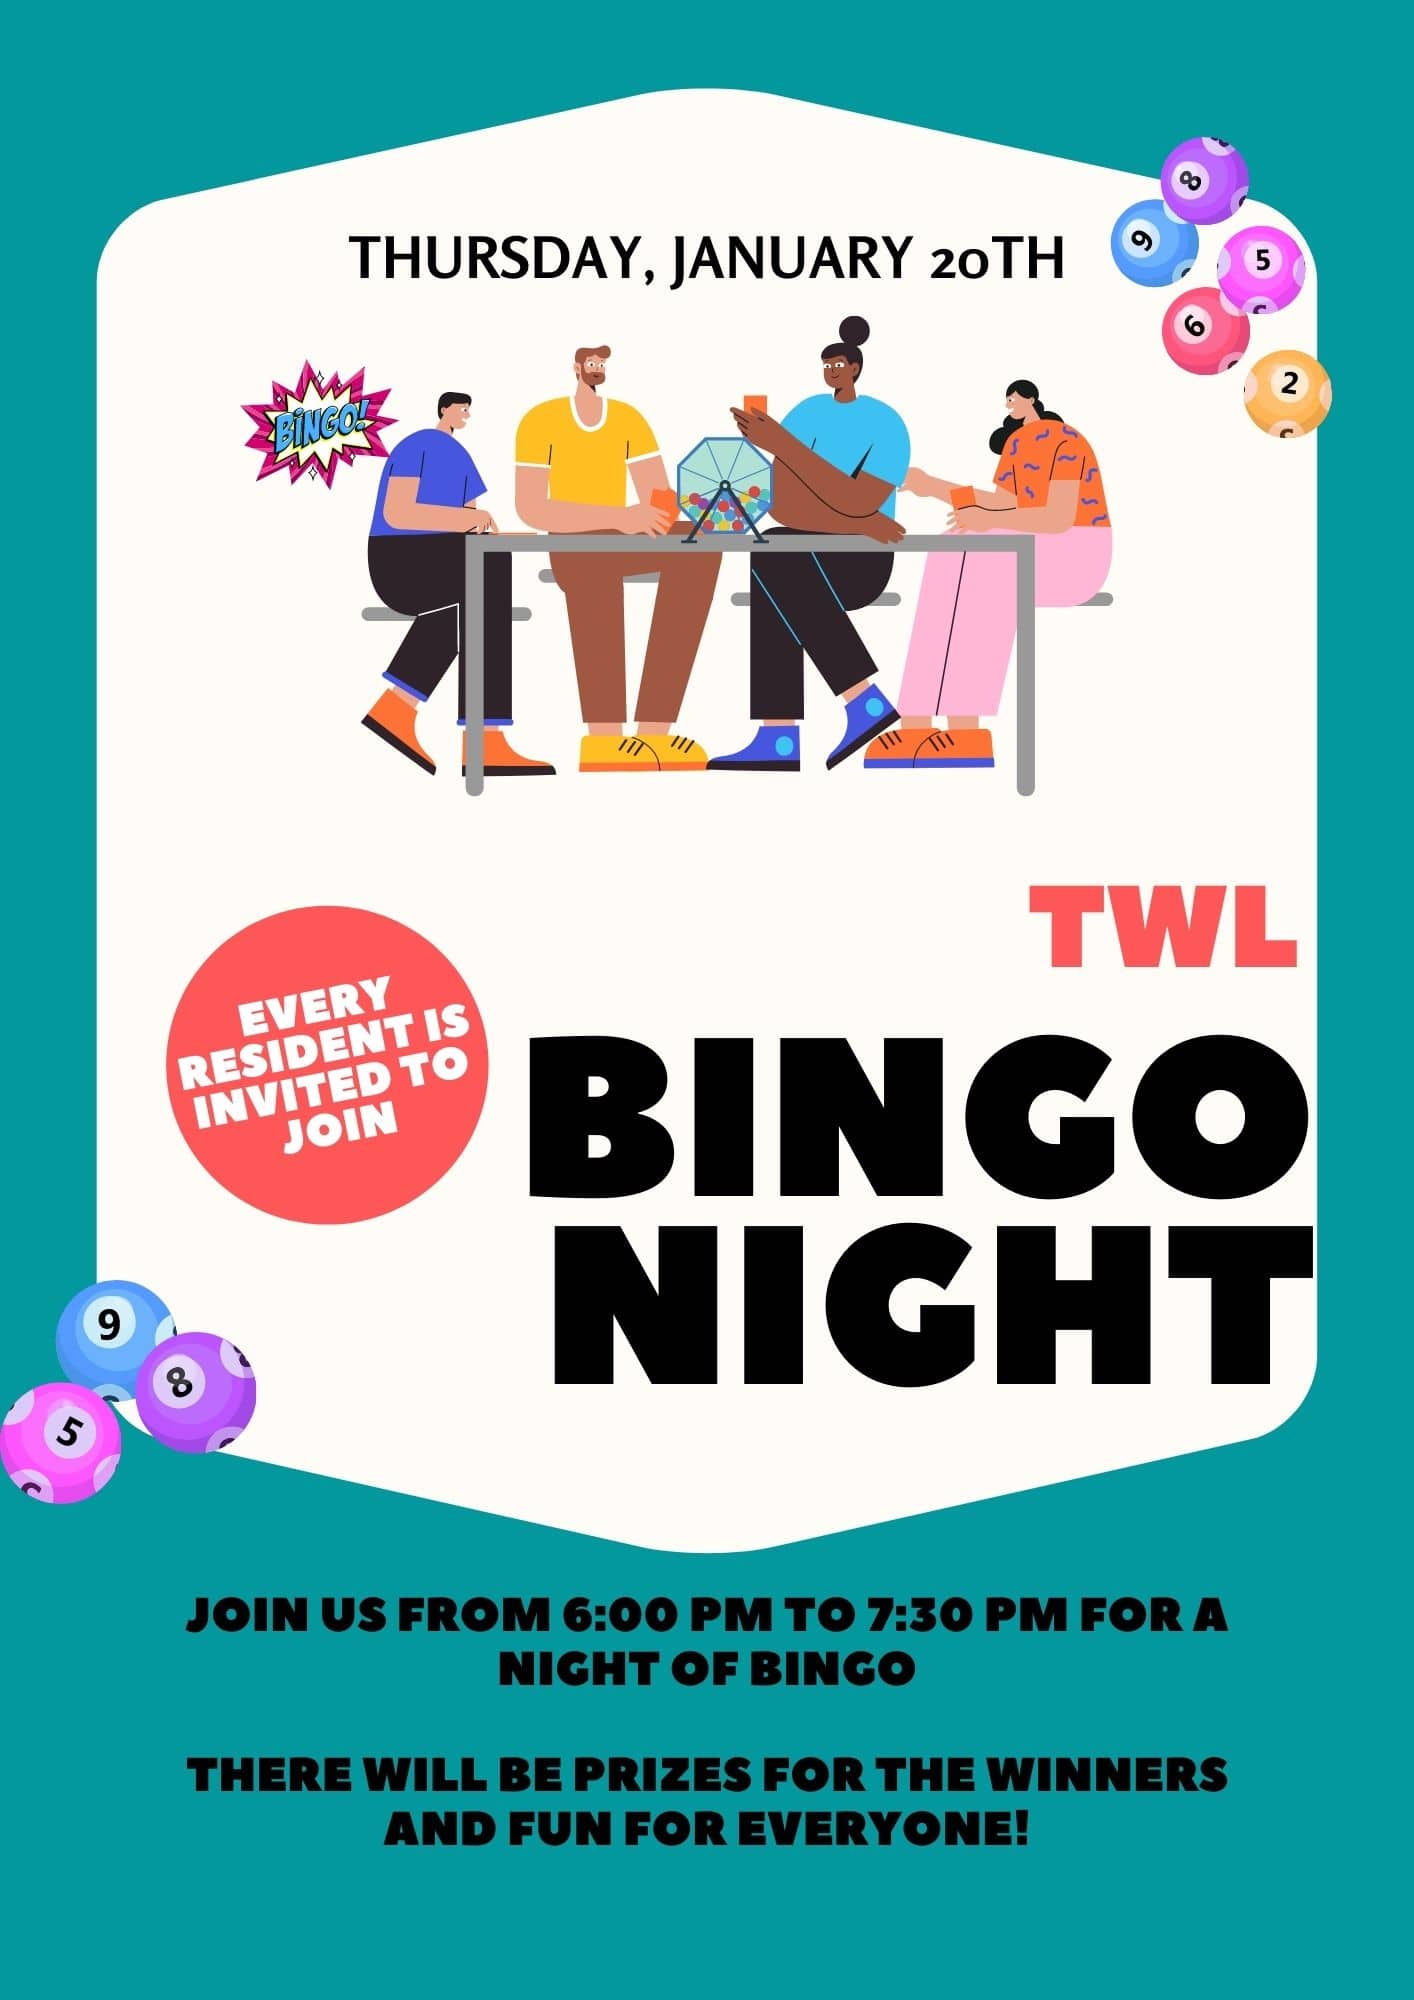 Are you searching for a fun and exciting event? Look no further! Join us at our upcoming TWL Bingo Night and experience an evening filled with laughter, camaraderie, and the opportunity to win